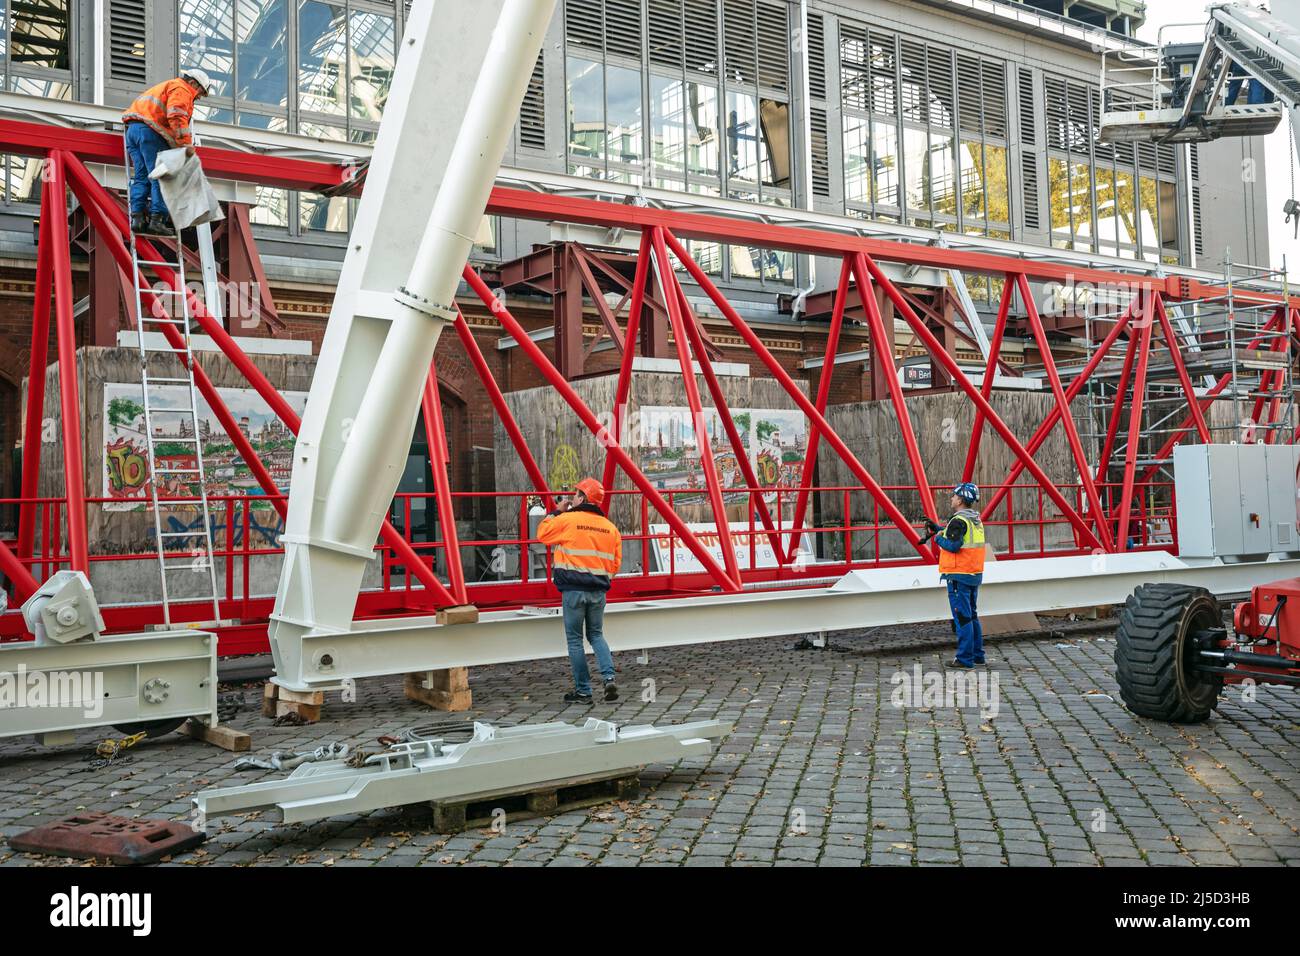 Germany, Berlin, Oct. 31, 2021. Construction work at the Ostbahnhof station on Oct. 31, 2021. The plan is to place a 75-meter-long steel structure at a height of more than 40 meters above the northern hall roof of the Ostbahnhof station in such a way that it can be moved back and forth along its entire length. From this bridge girder, the railroad will renovate the hall roof. The protective bridge weighs sixty tons and is seventy meters long. [automated translation] Stock Photo